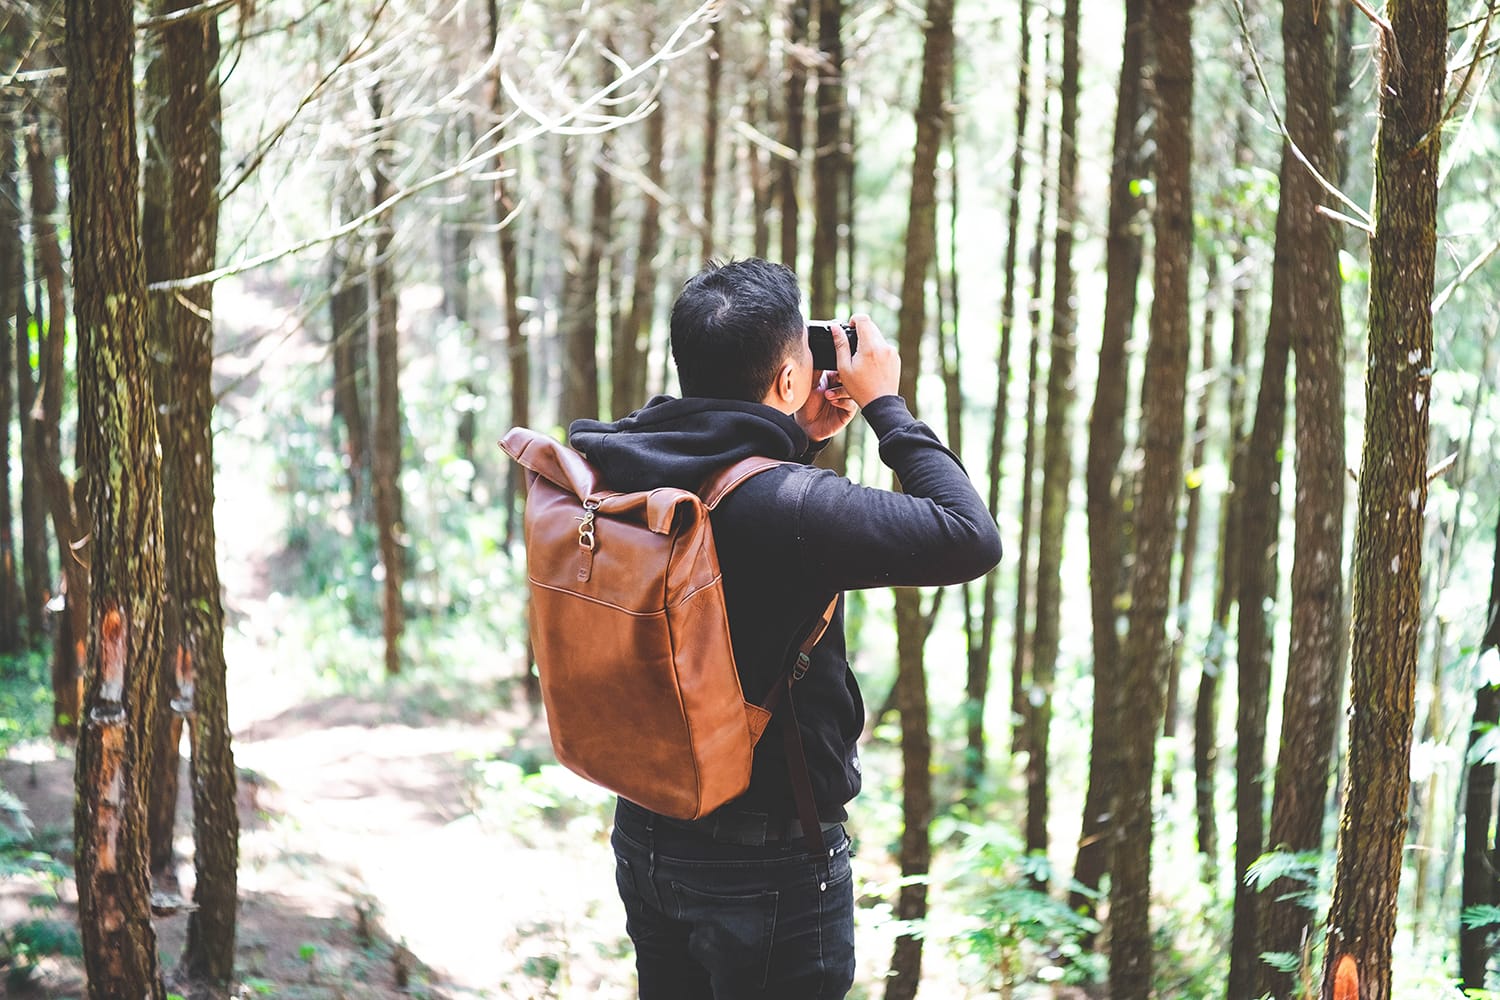 Travel Photography Gear & Accessories to Bring on Your Next Trip